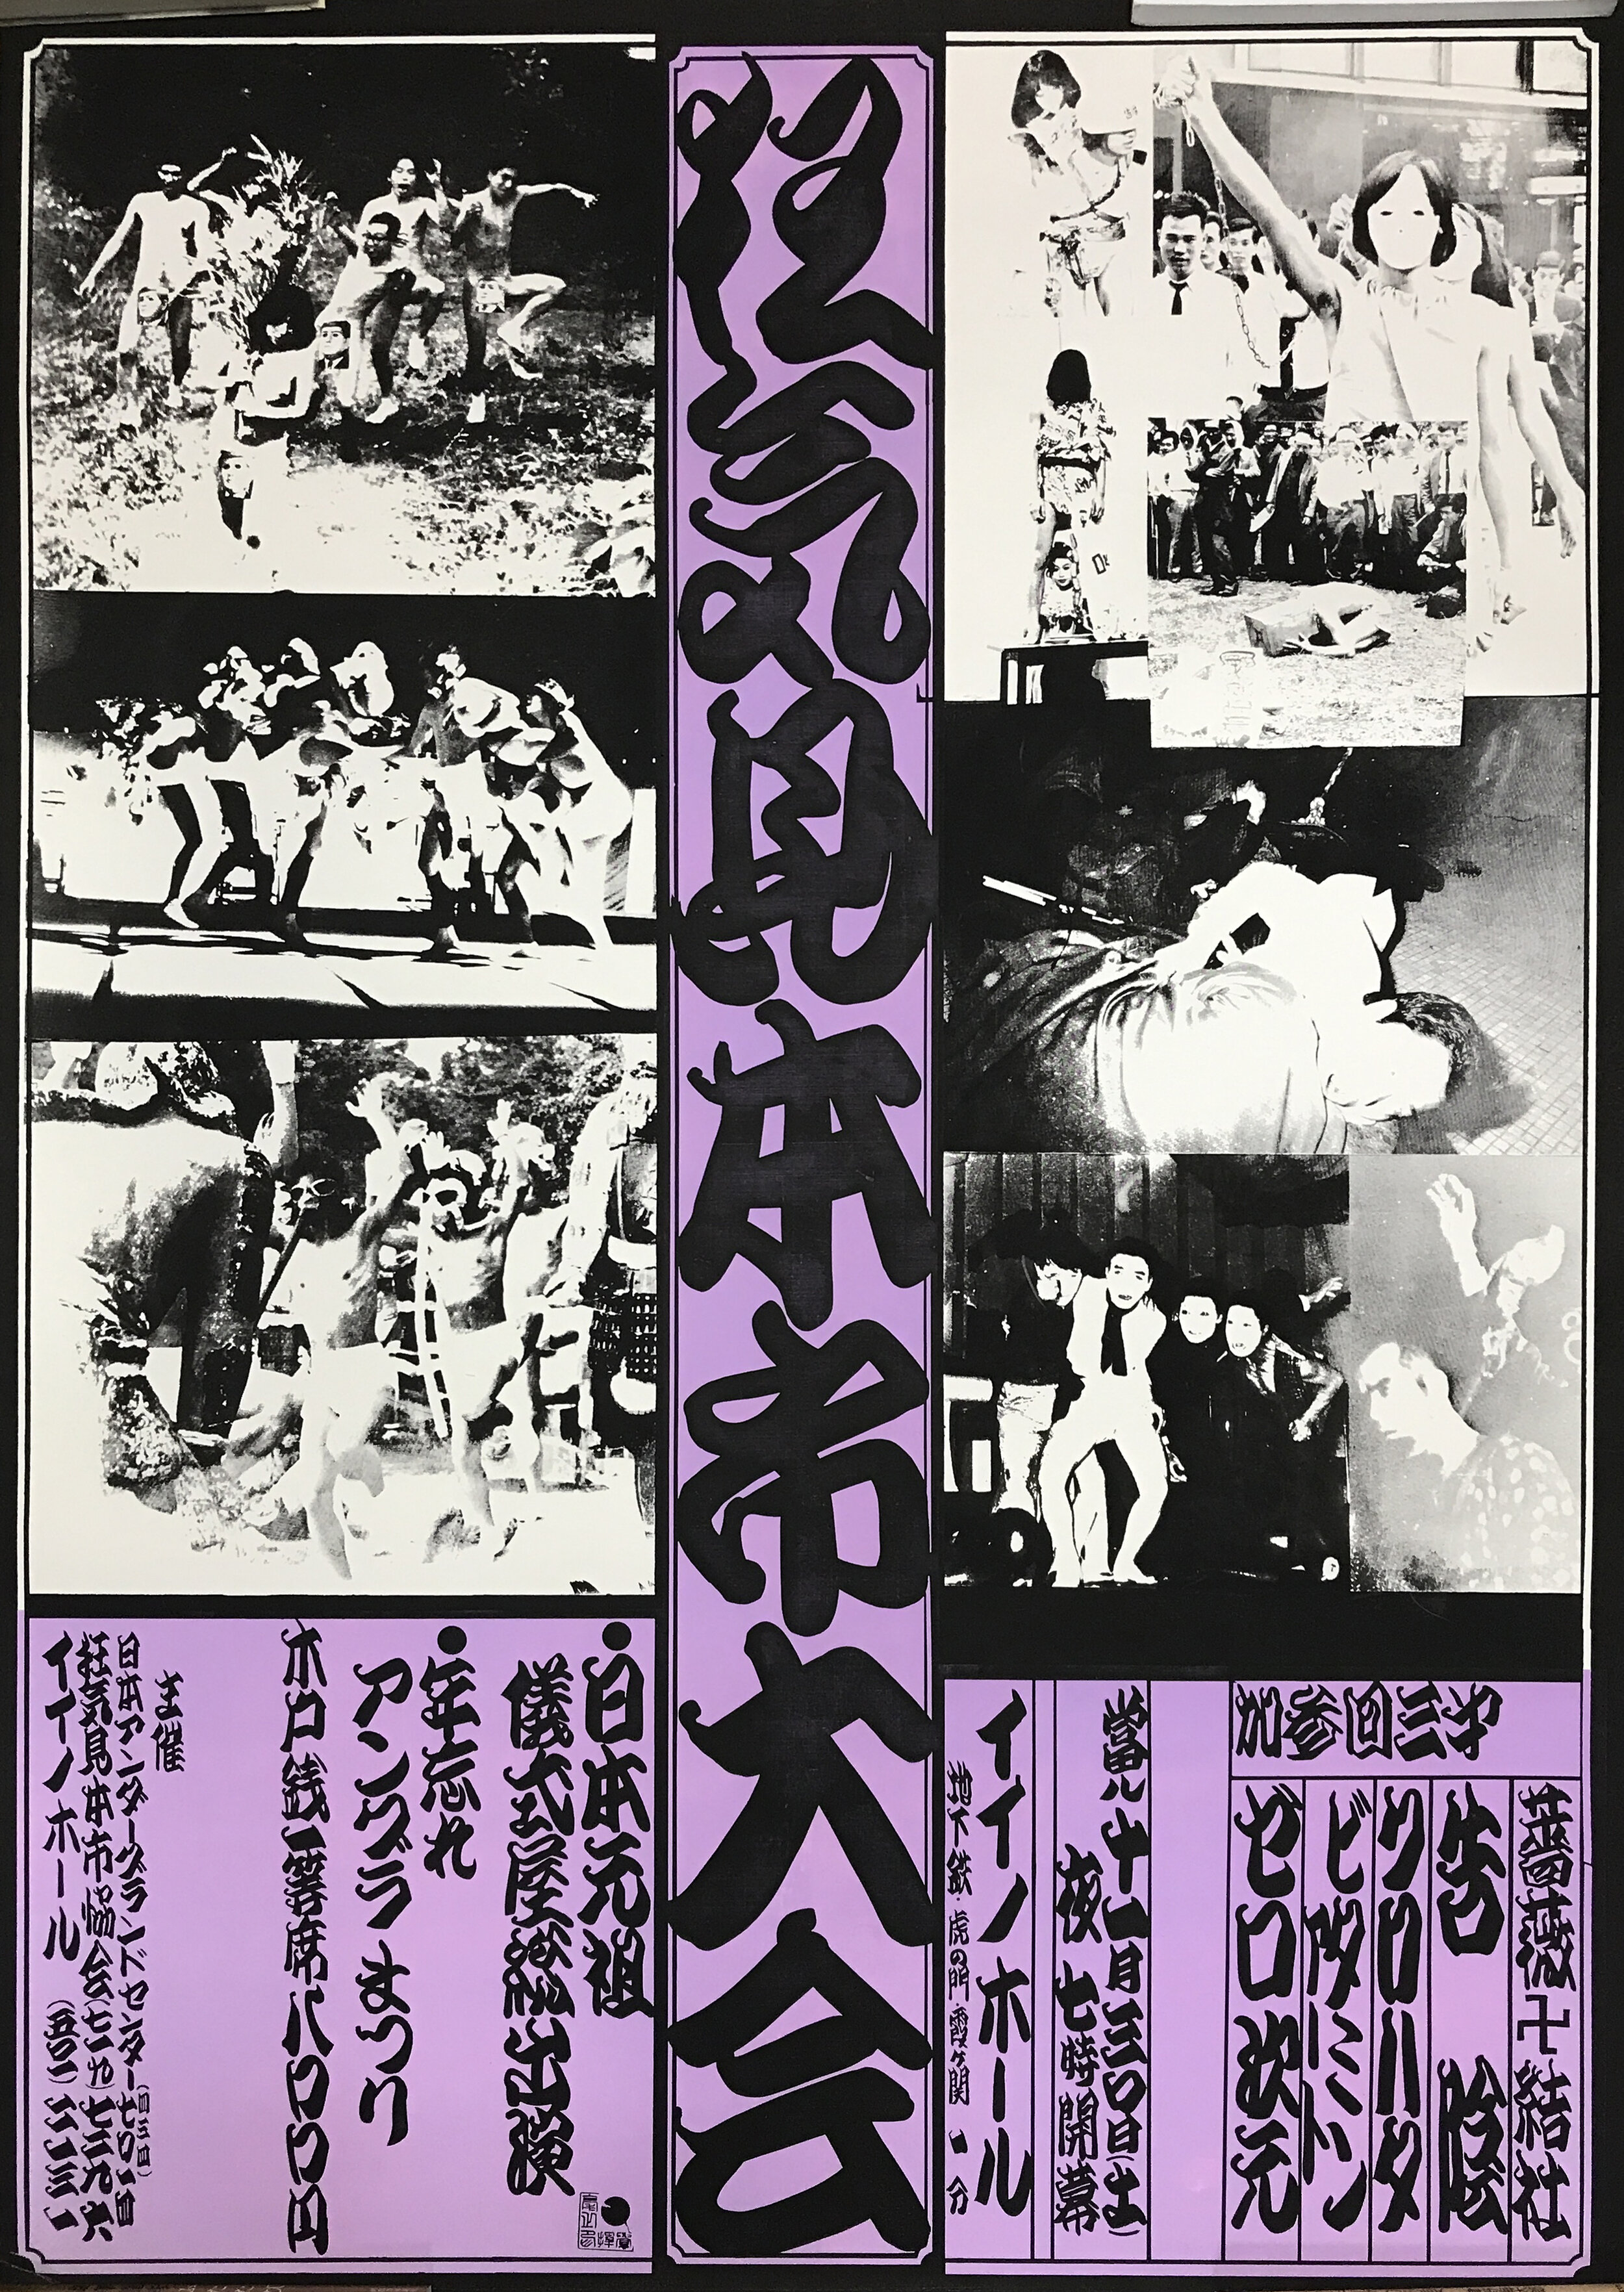  [fig. 7] Poster for  Madness Sample Fair, Year-End Underground Party  at Iino Hall, November 30th, 1968. © Zero Jigen Katō Yoshihiro Archive 